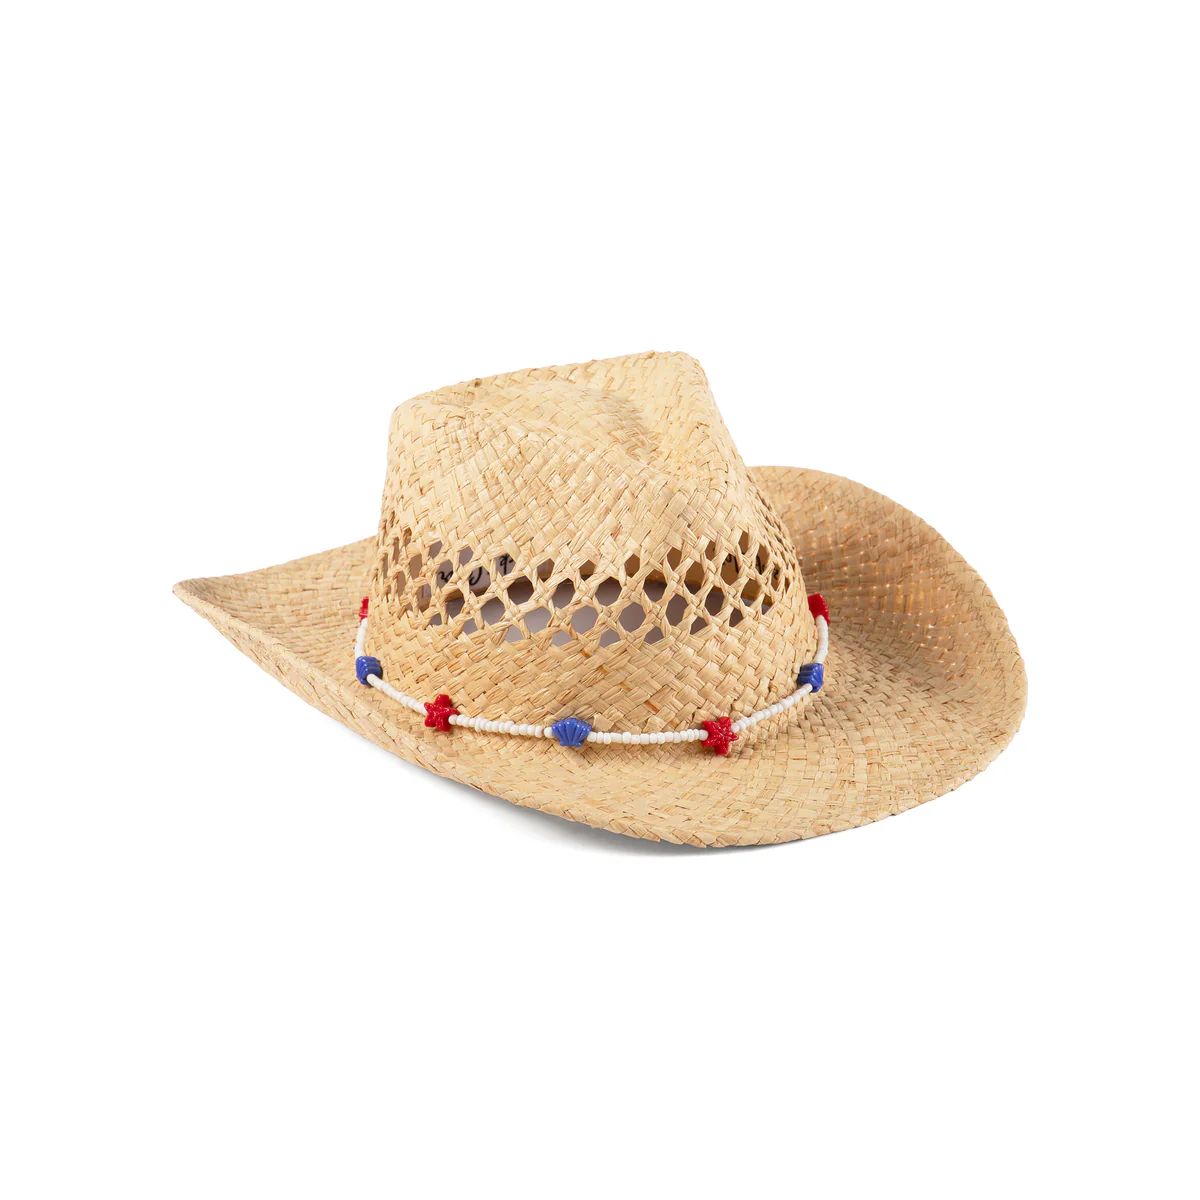 The Desert Cowboy - Straw Fedora Hat in Natural | Lack of Color US | Lack of Color US